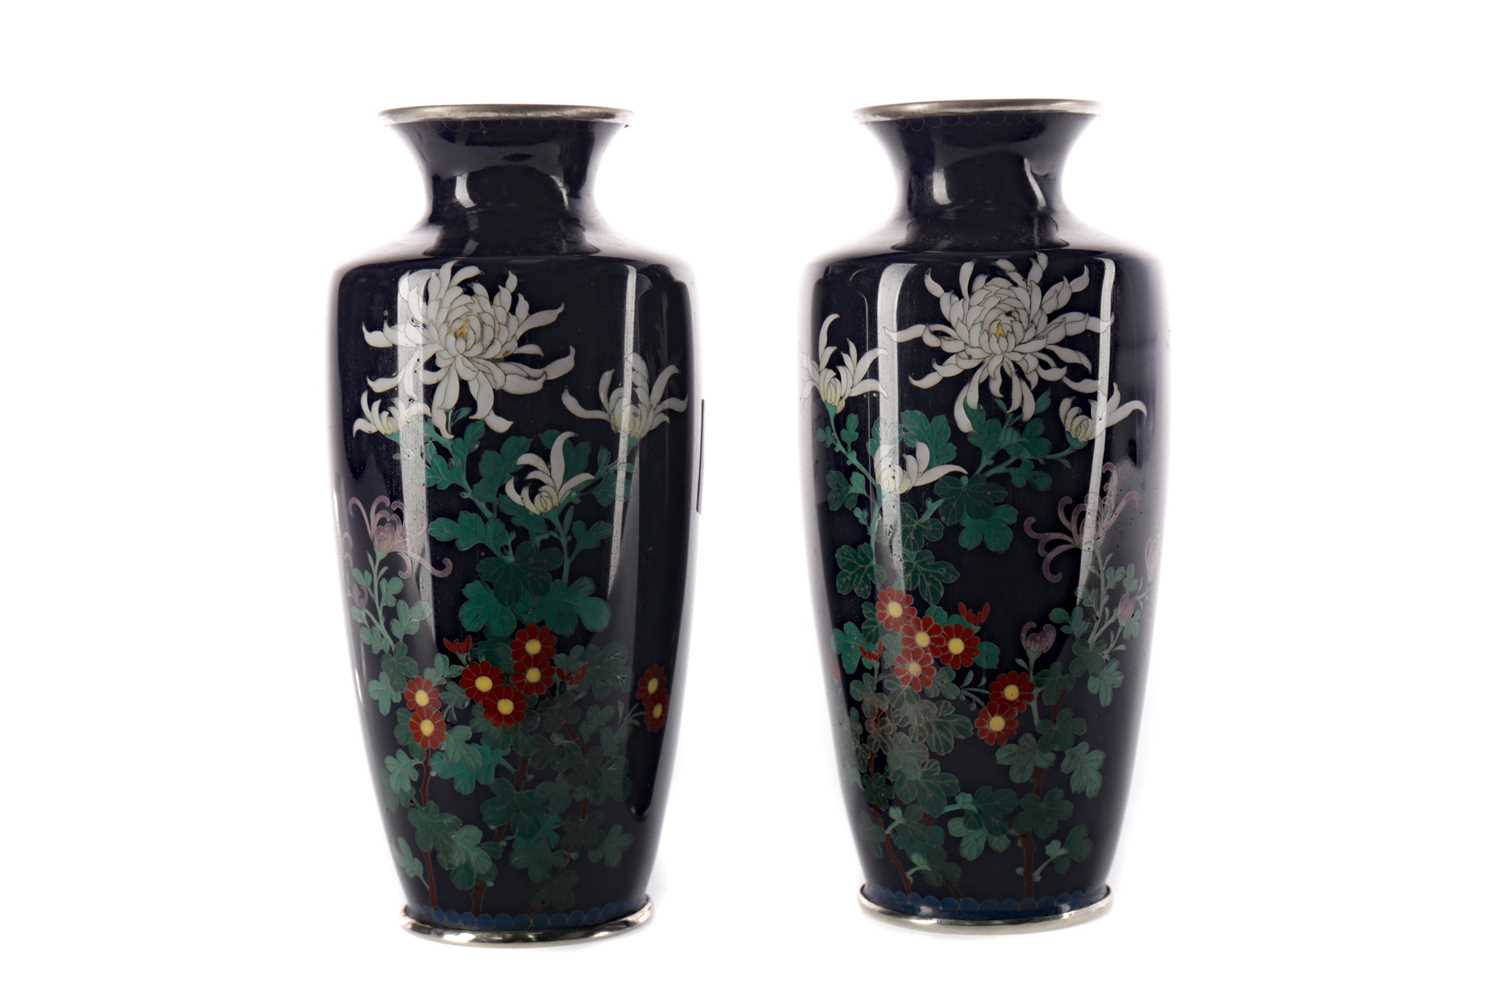 Lot 794 - A PAIR OF EARLY 20TH CENTURY JAPANESE CLOISONNE ENAMEL VASES